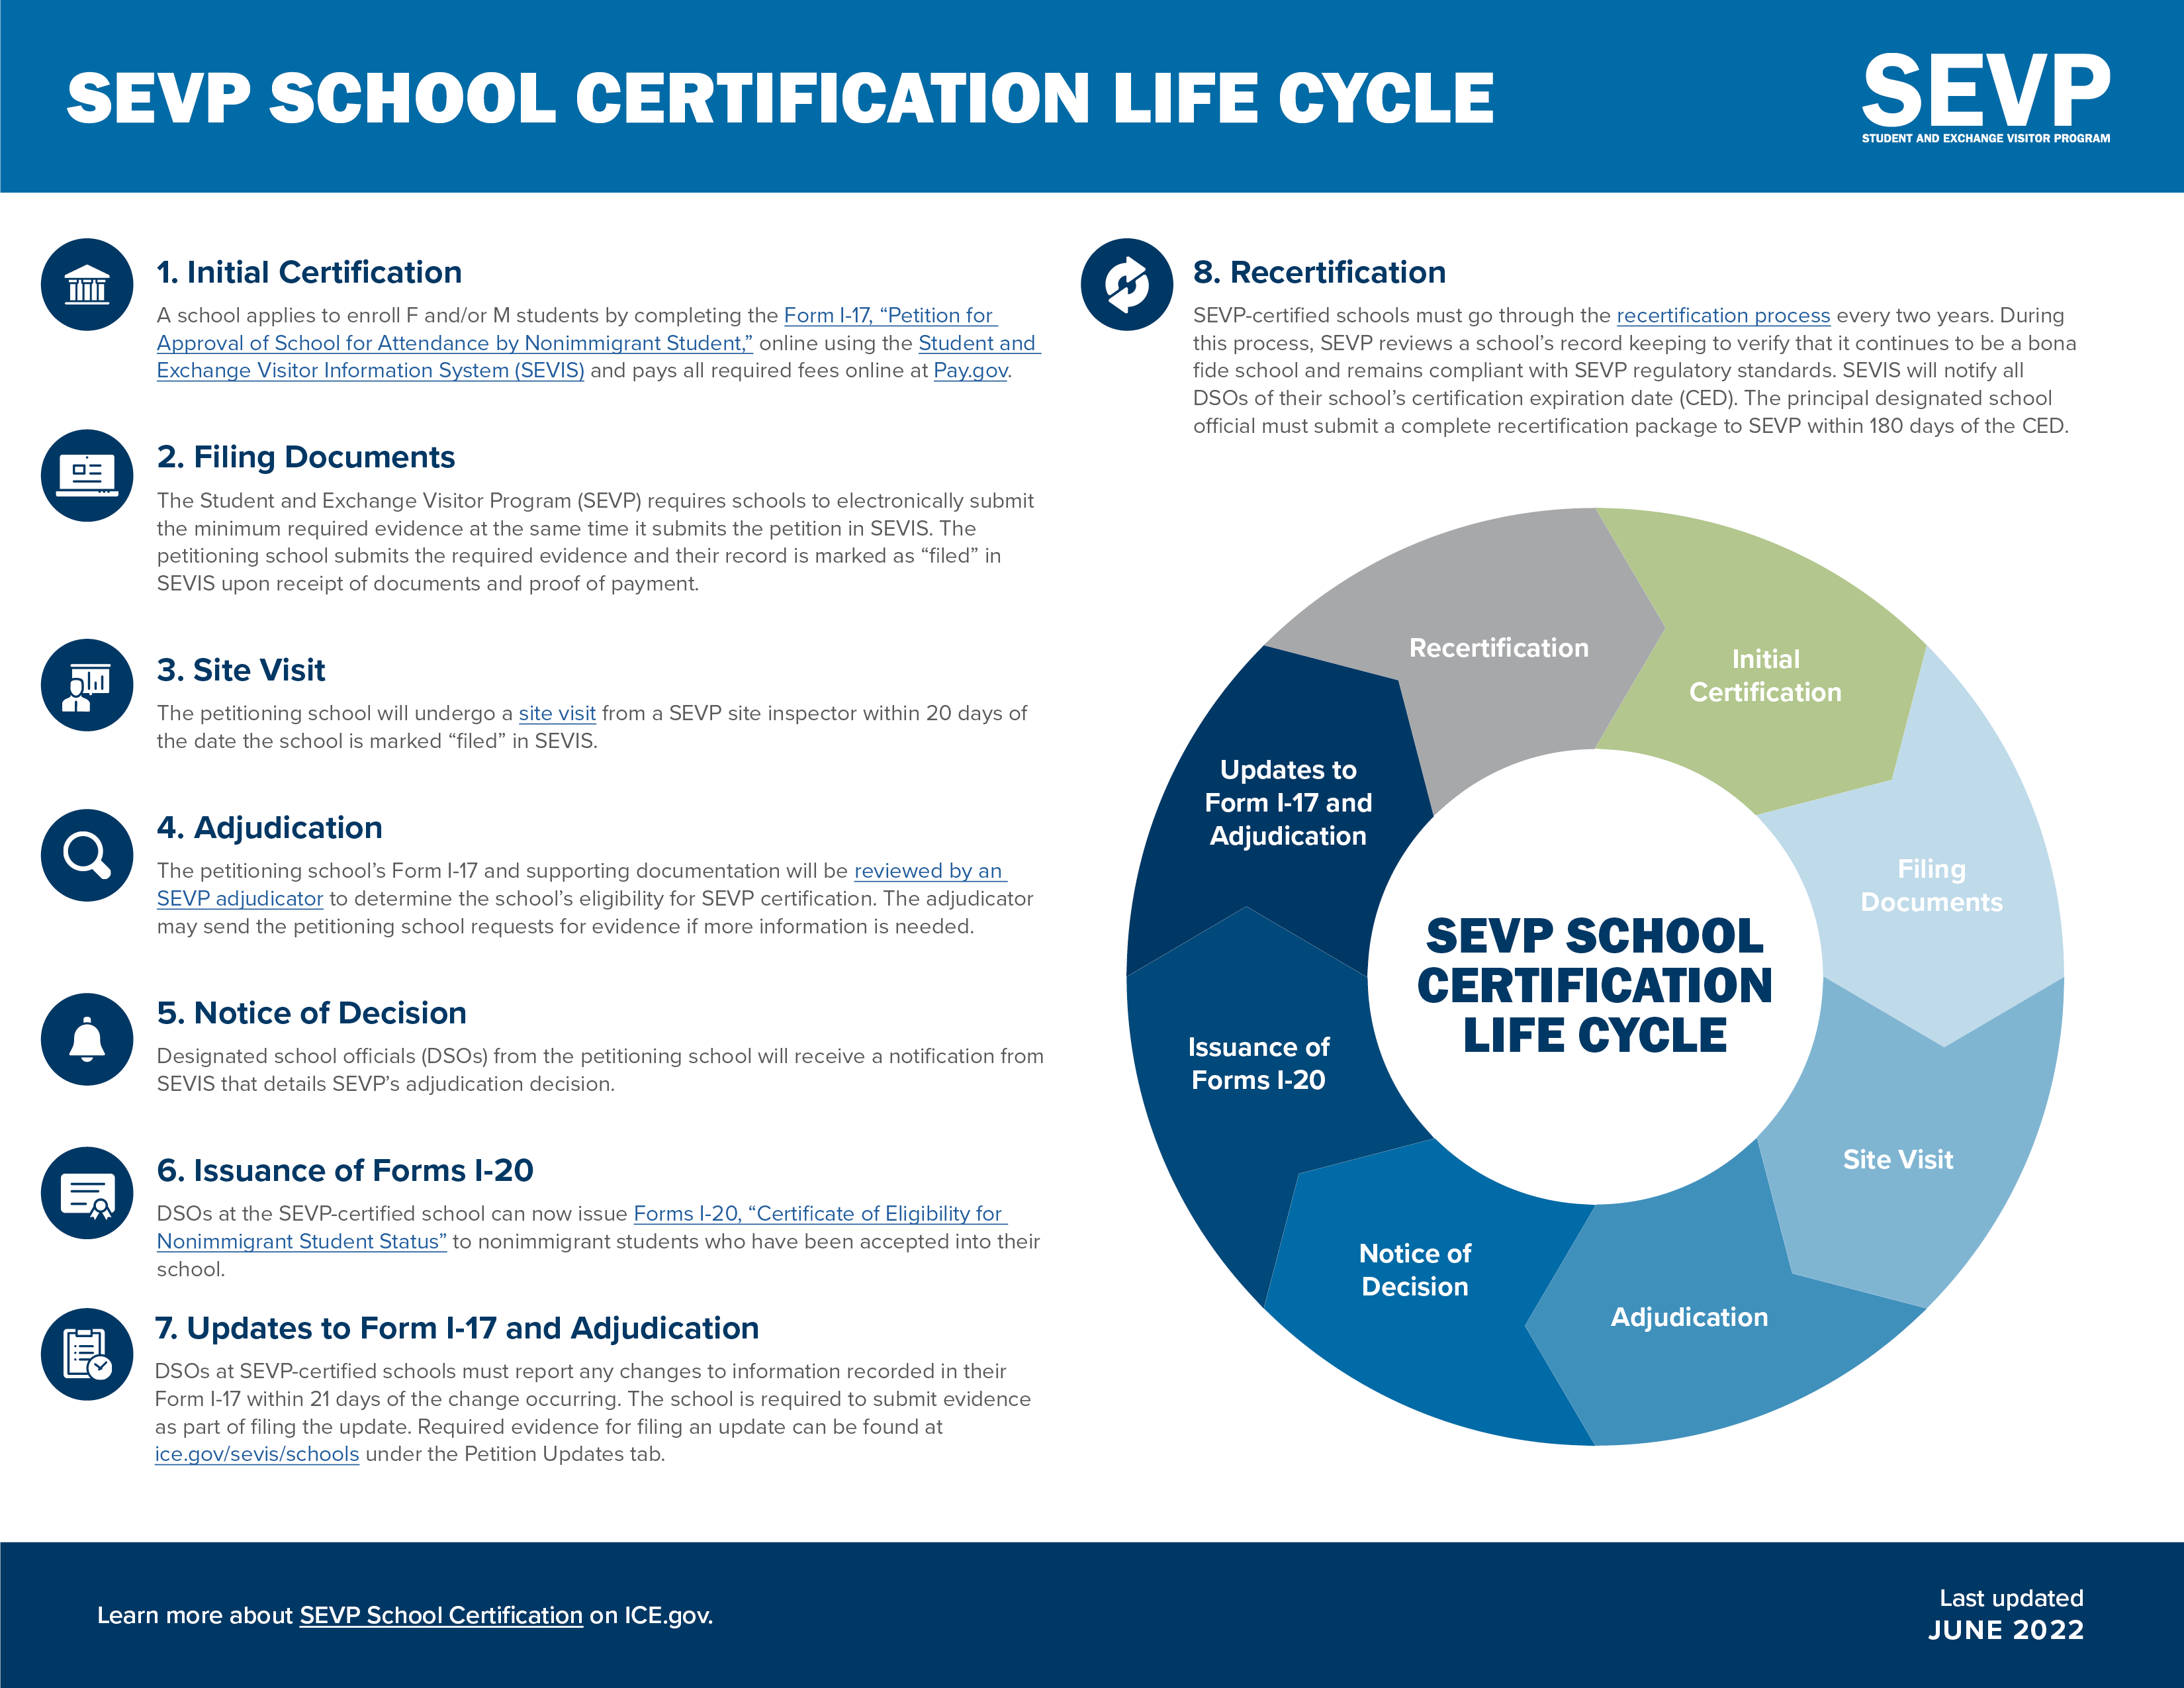 SEVP Certification Life Cycle Study in the States